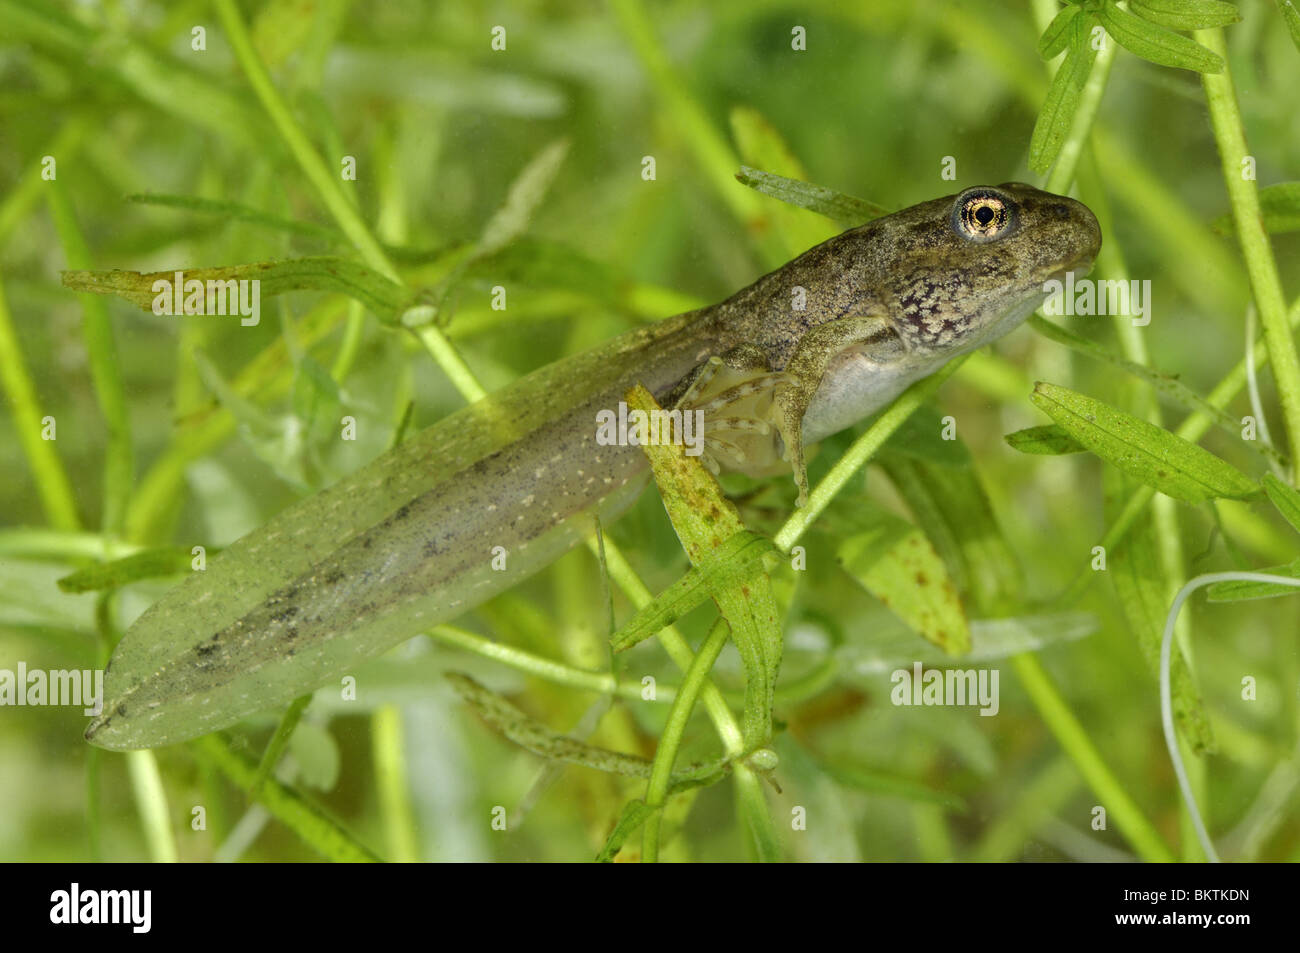 Tadpole with 4 legs & tail swimming in a puddle Stock Photo ...